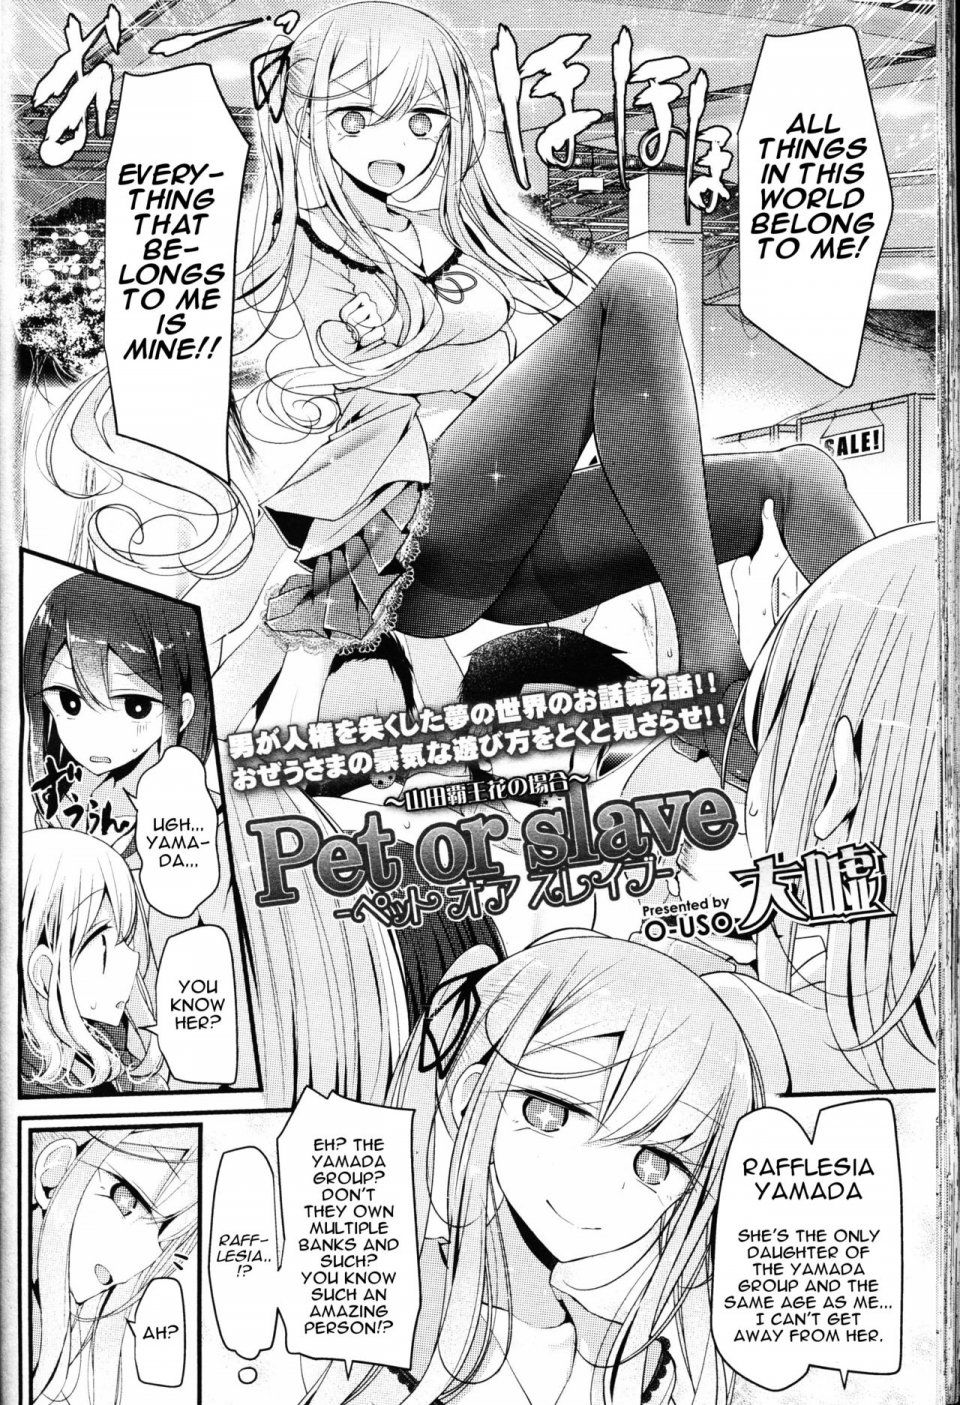 Oouso - Pet or Slave - The Case of Rafflesia Yamada (Girls forM Vol. 12) - Photo #7